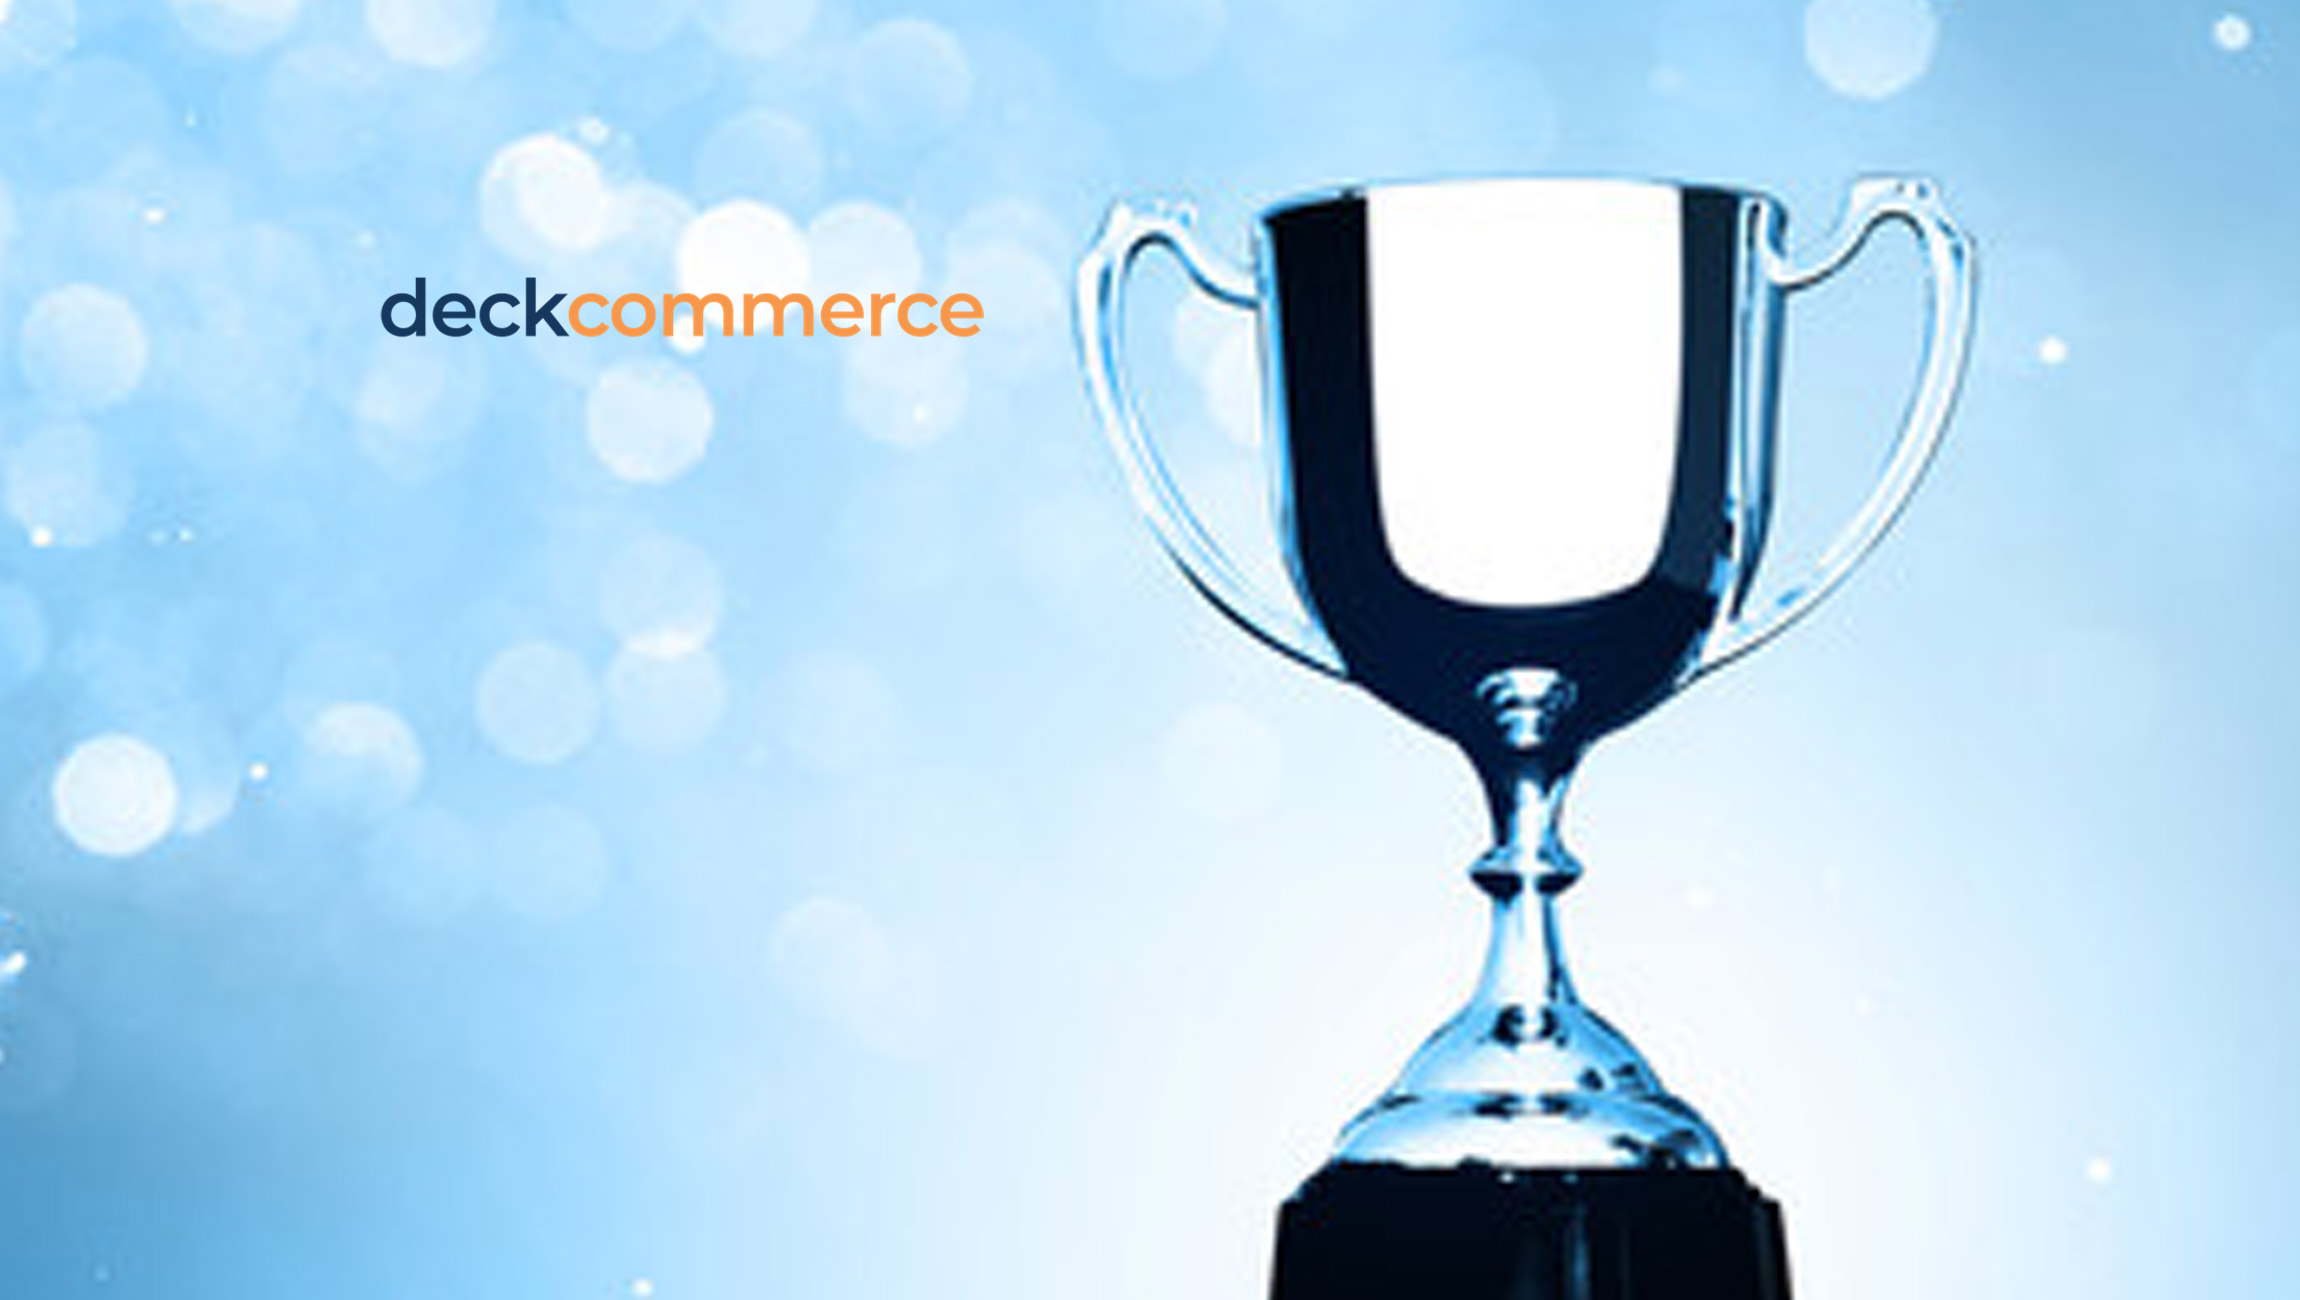 Deck Commerce Wins Top Supply Chain Project Award from SDCE